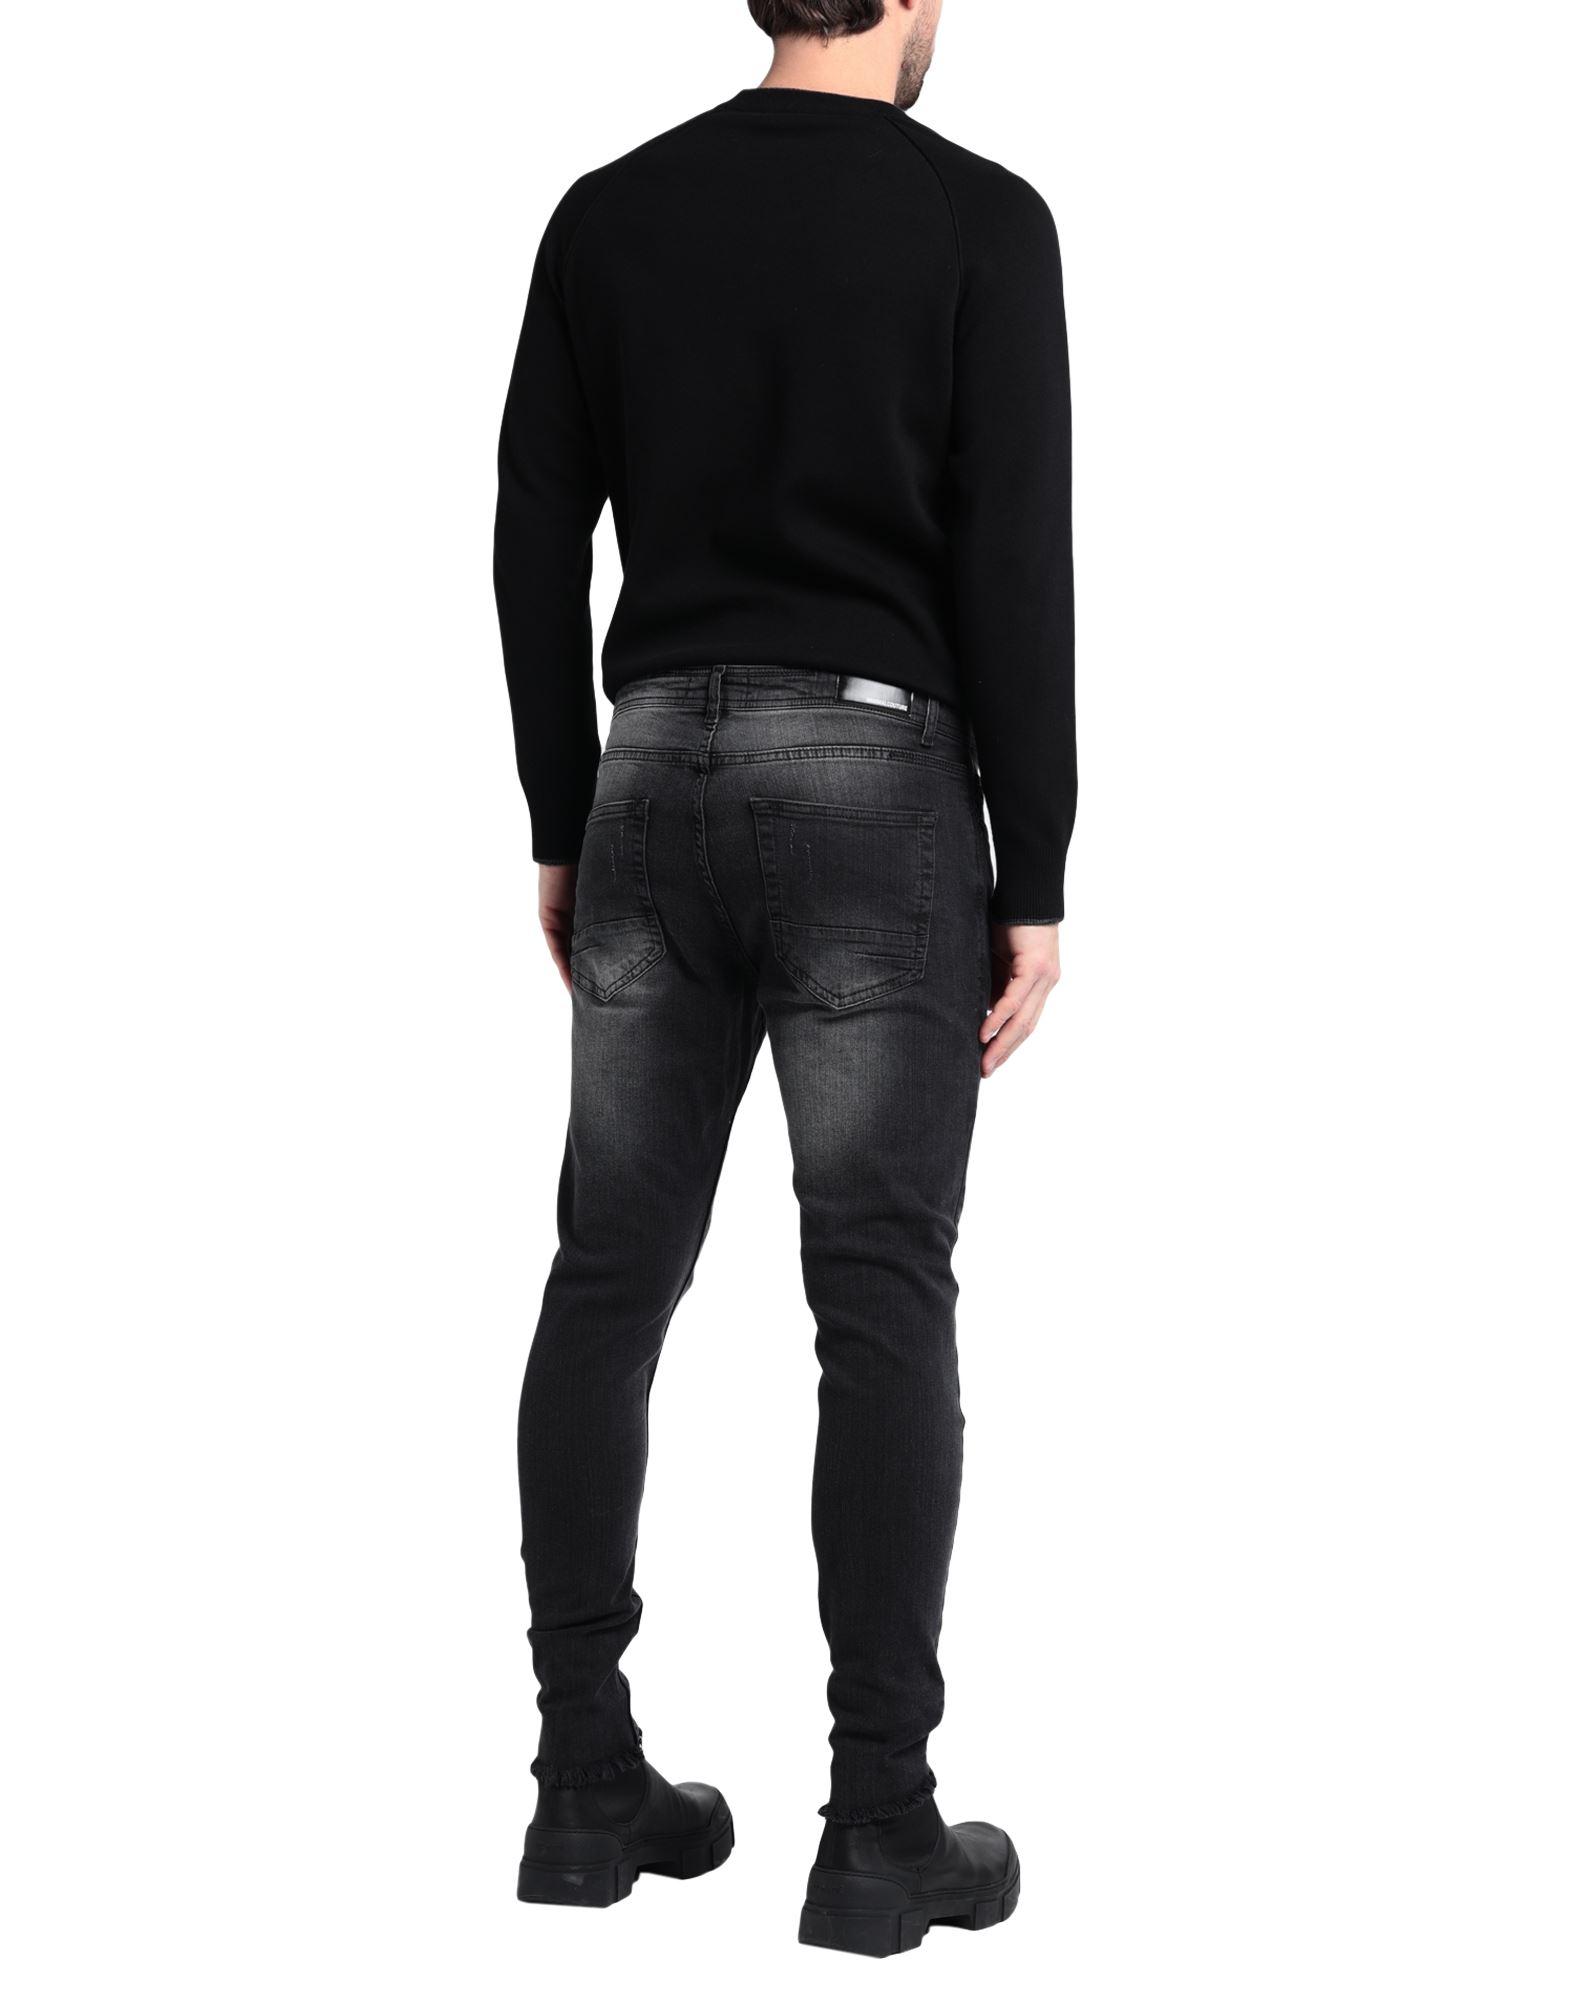 MNML Couture Denim Trousers in Black for Men - Lyst